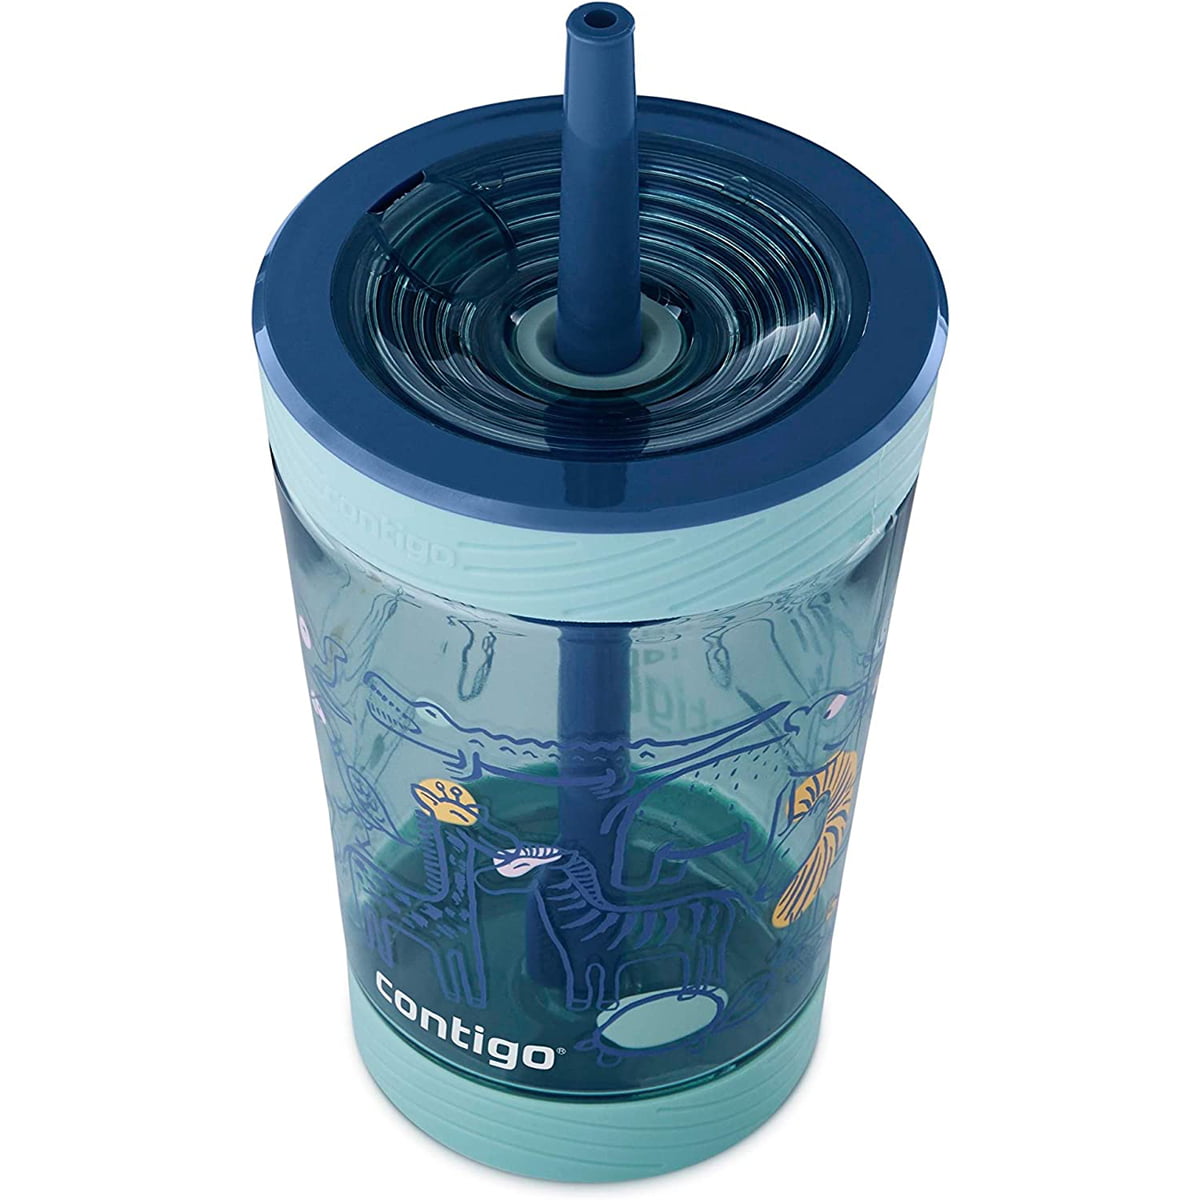 Contigo Kids Spill-Proof Tumbler with Straw & Leak-Proof Lid, 12oz  Vacuum-Insulated Stainless Steel …See more Contigo Kids Spill-Proof Tumbler  with